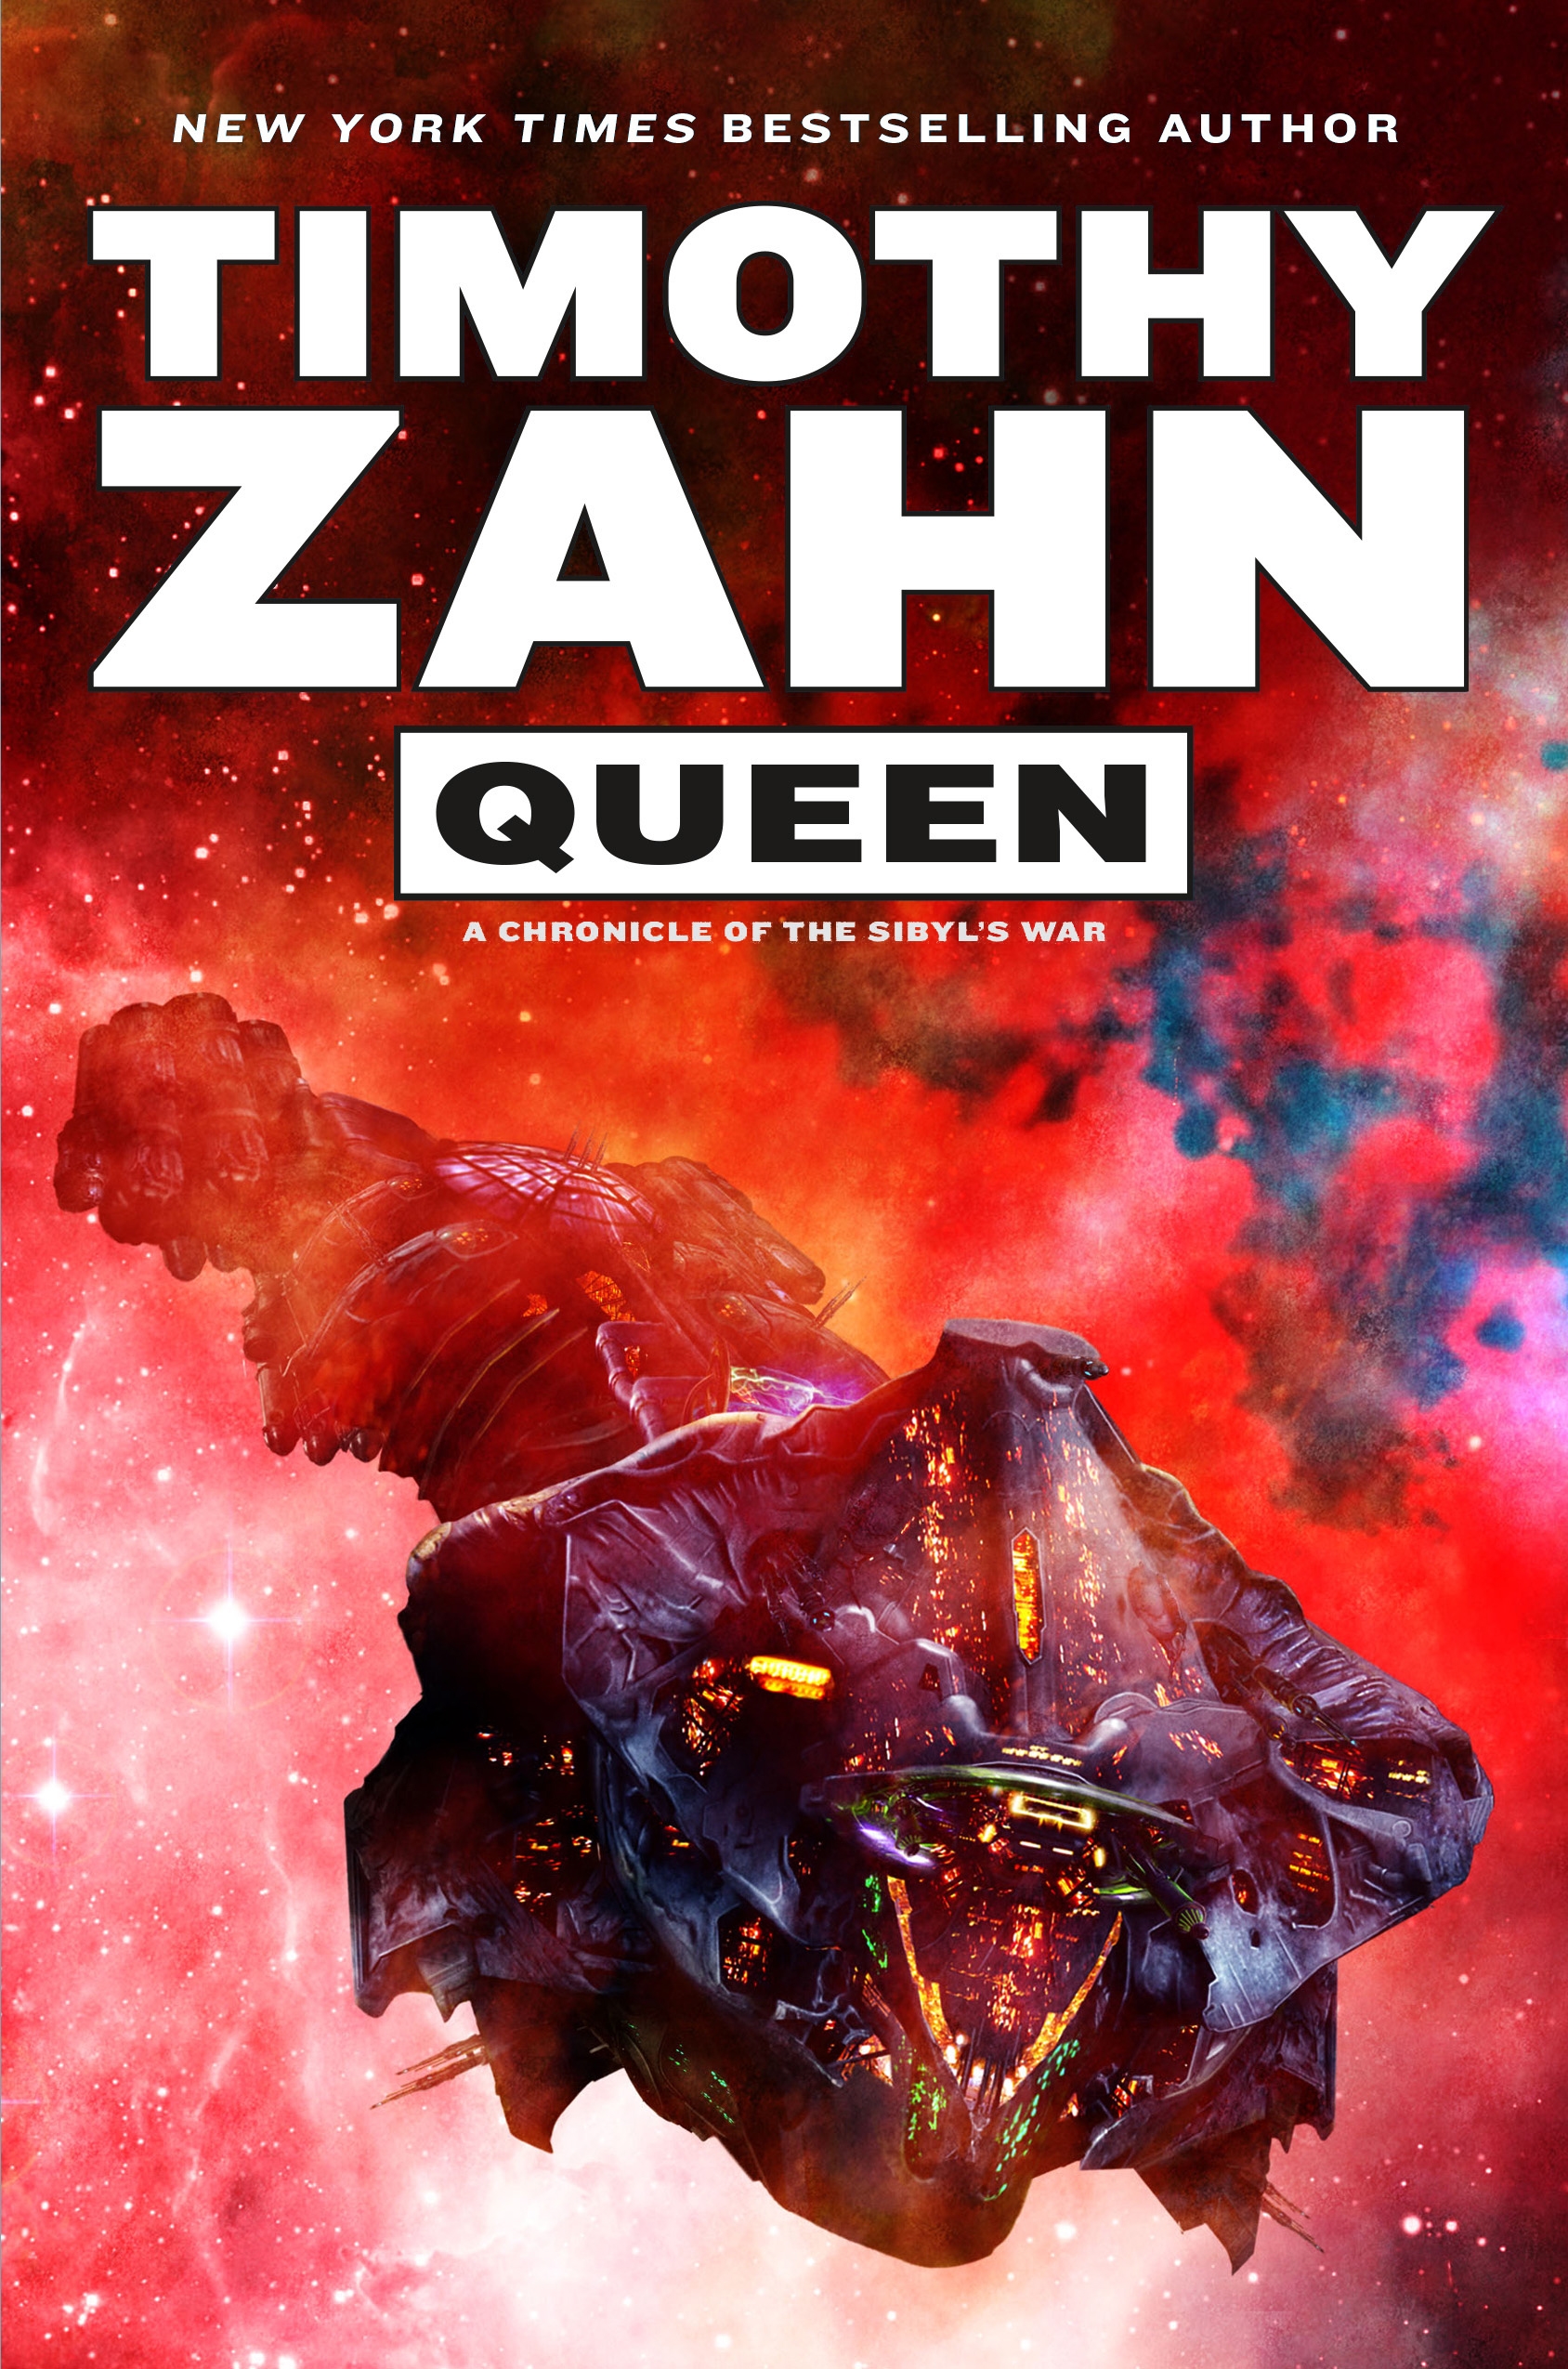 Queen : A Chronicle of the Sibyl's War by Timothy Zahn